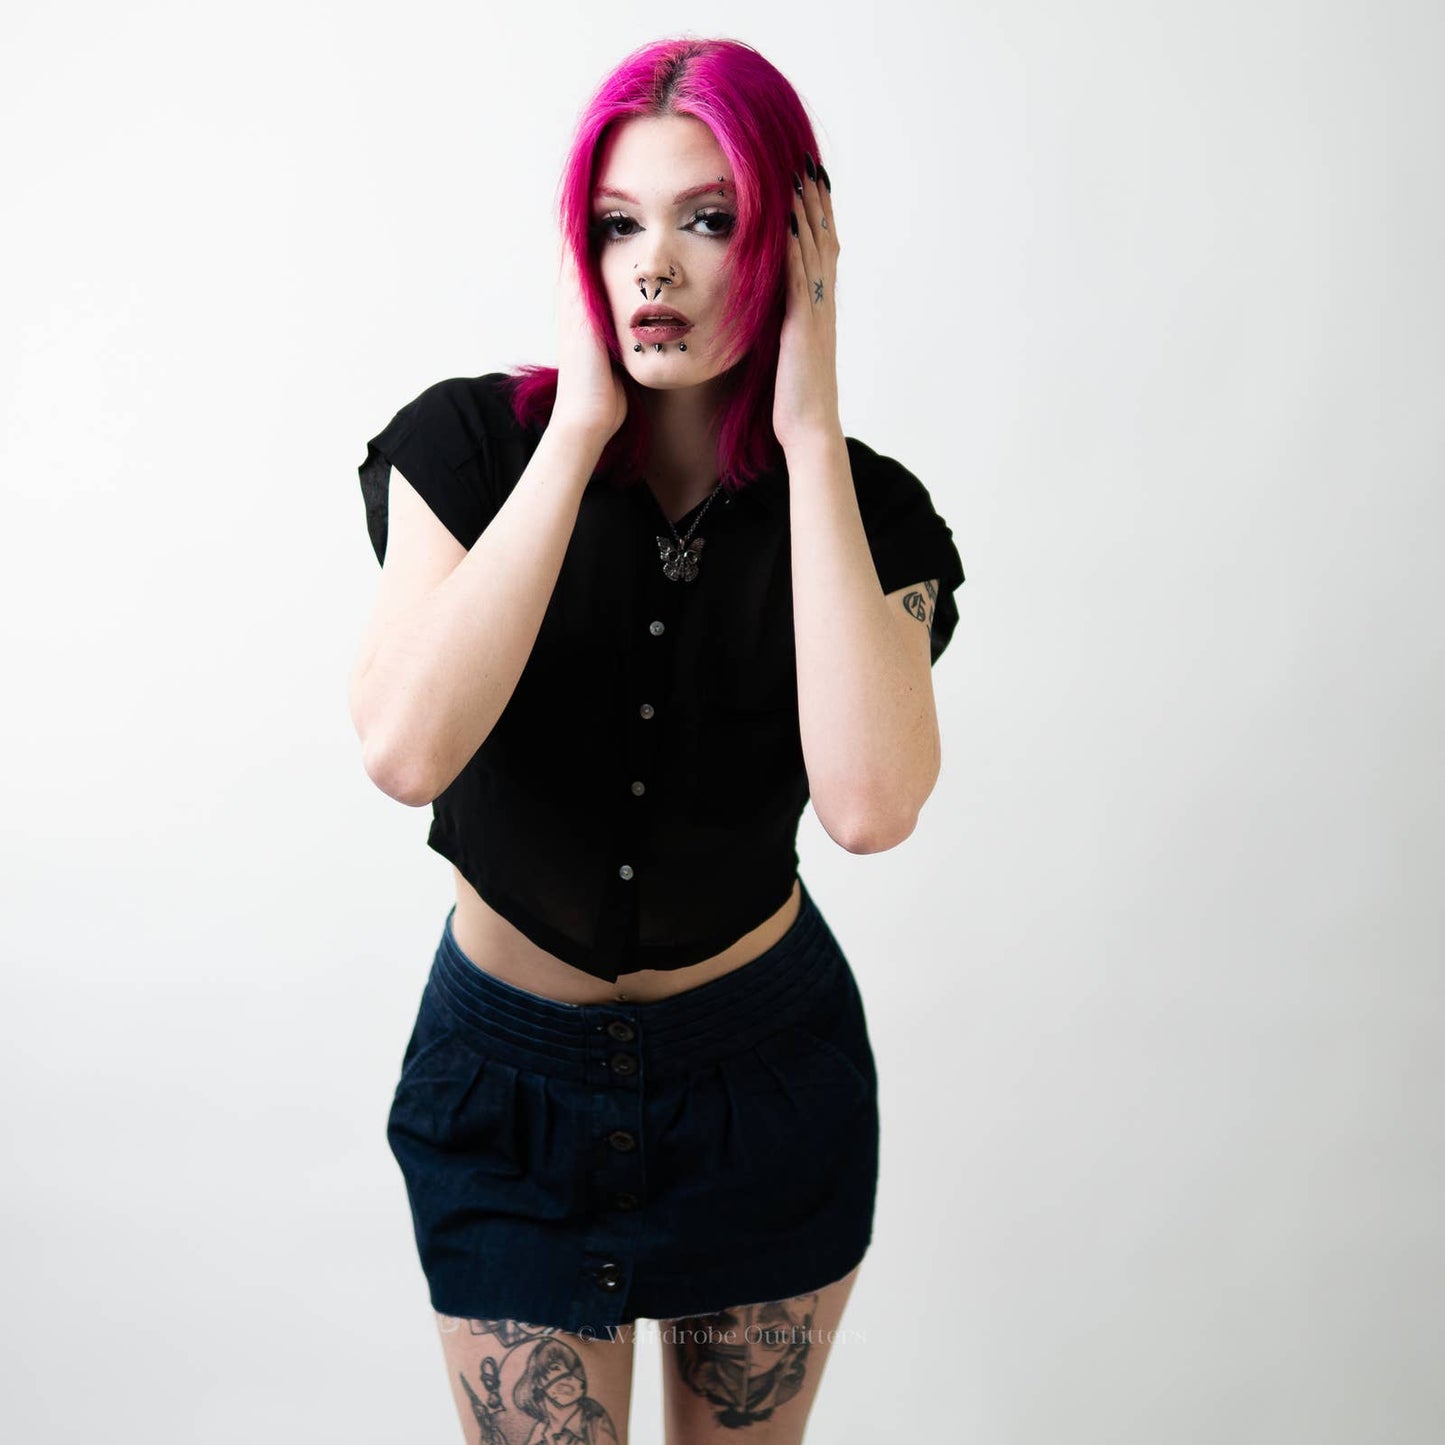 Black Cropped Sheer Short Sleeve Button Down - S